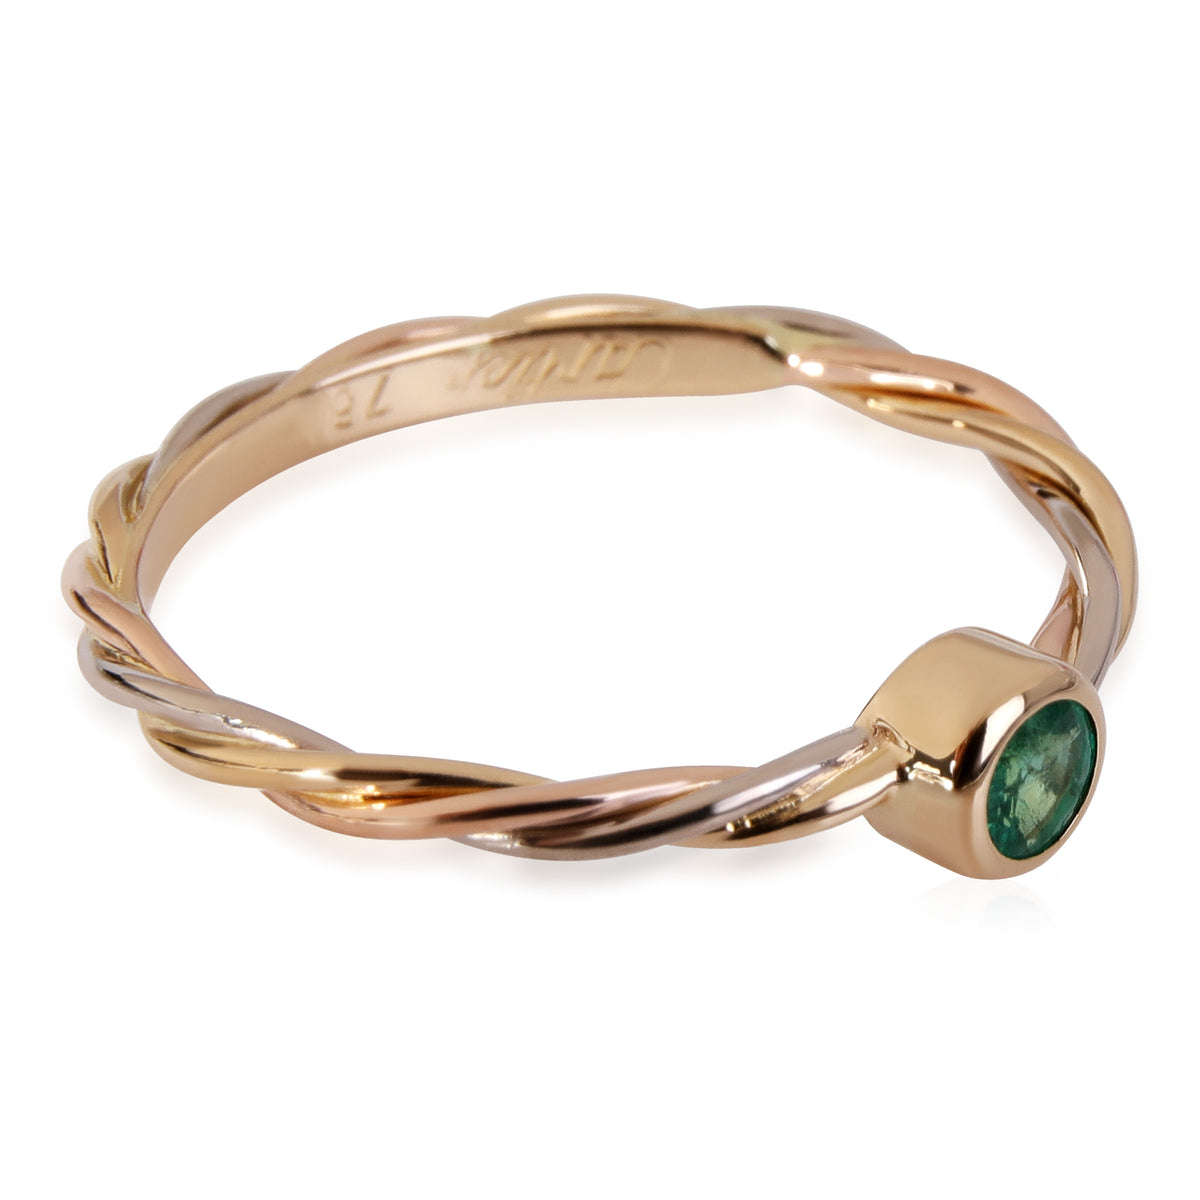 Cartier Twist Ring With Emerald in 18K Tri-Color Gold